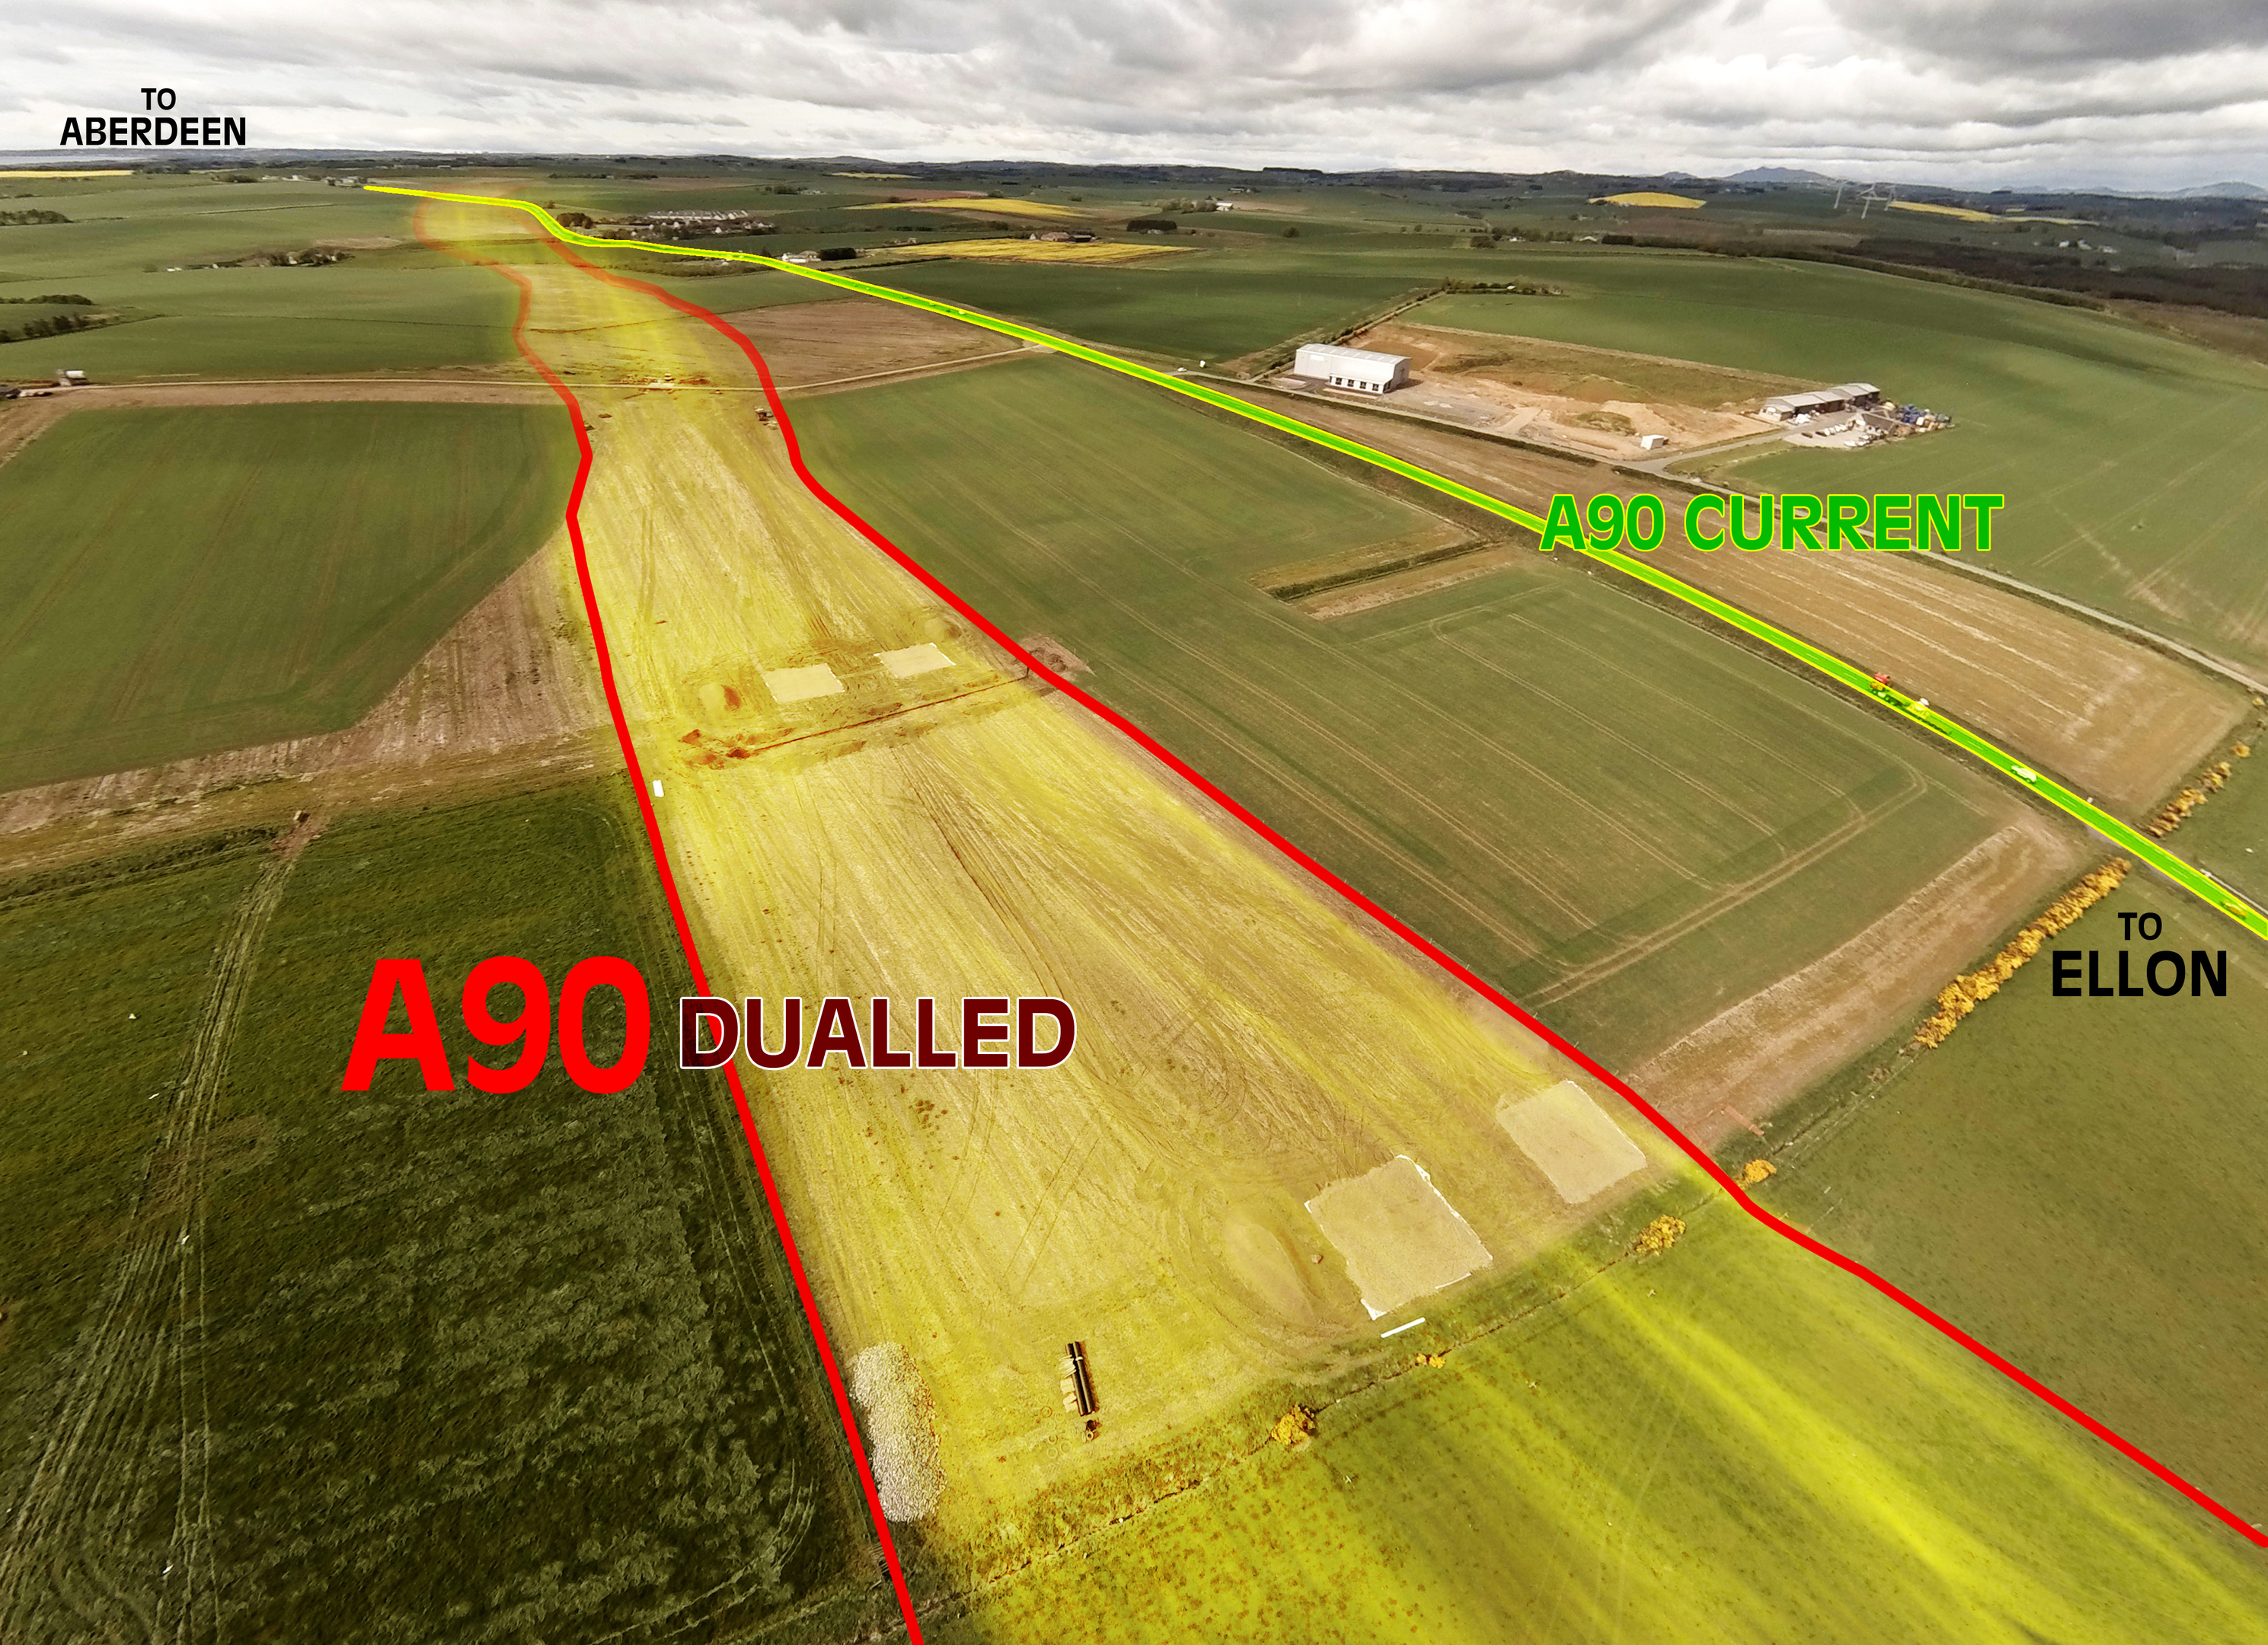 The shaded area shows the route of the new dualled A90 and the current A90 north of Aberdeen